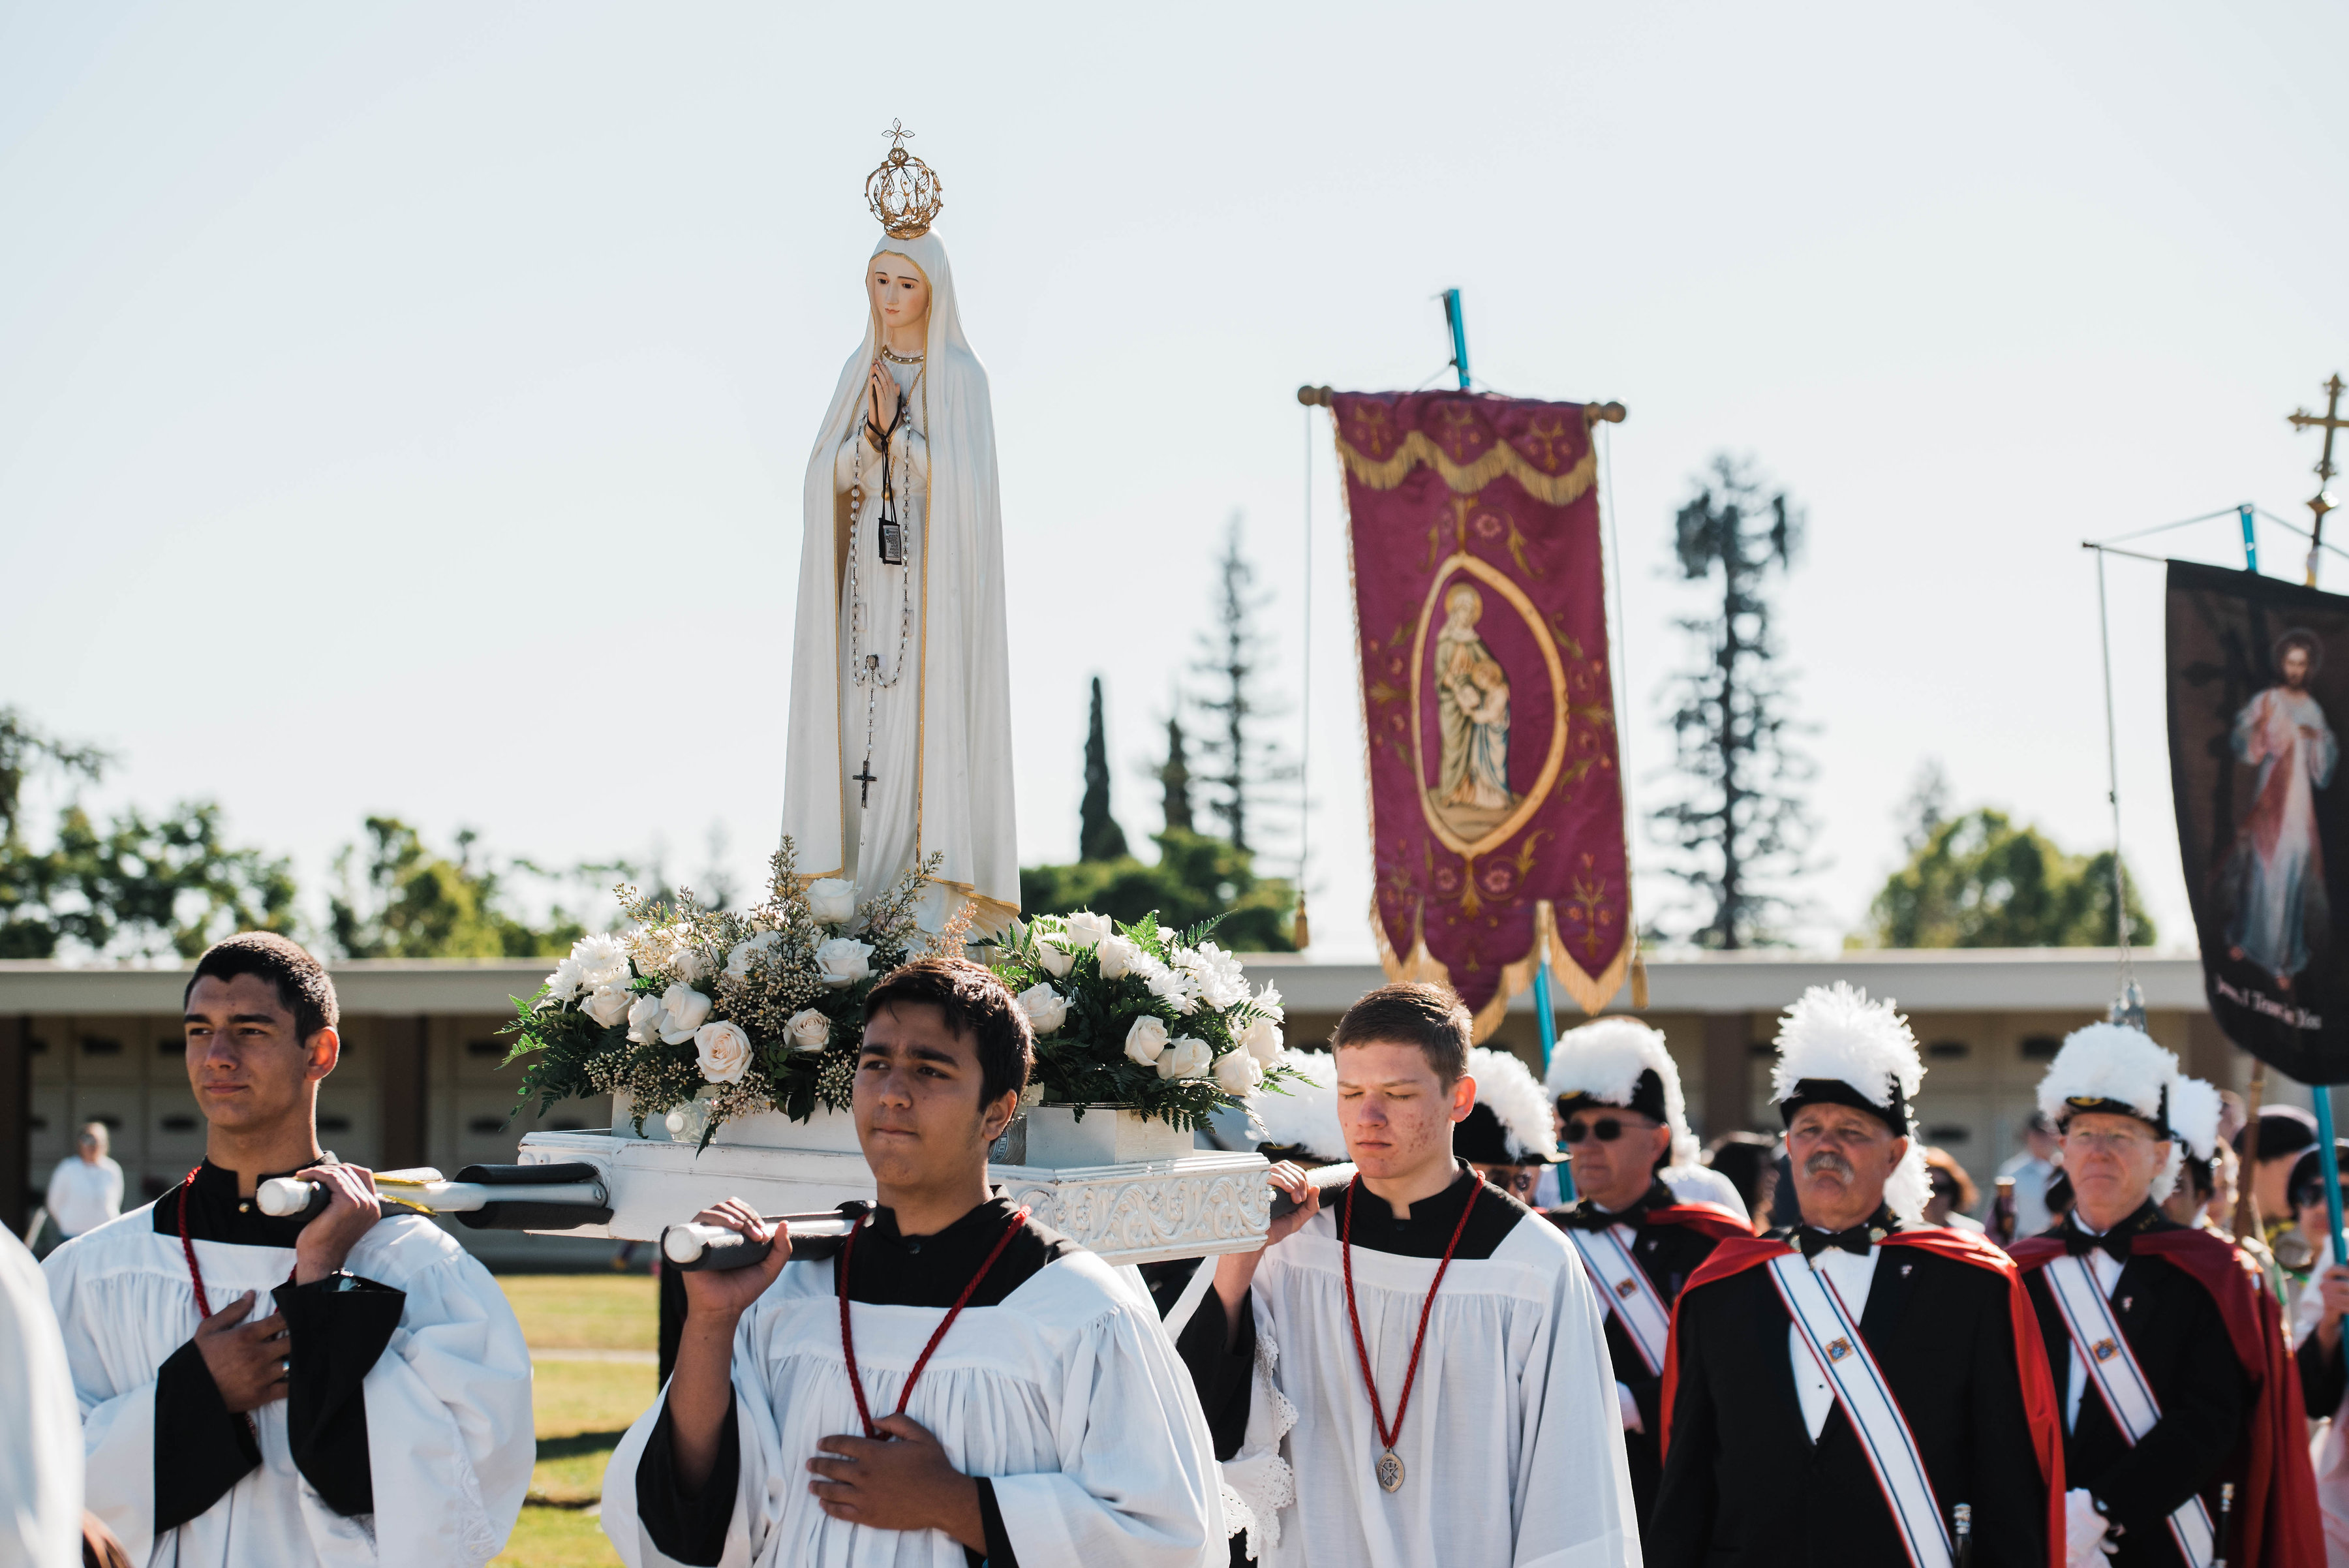 Modern-day Calvary: Eucharistic procession at 40 Days for 